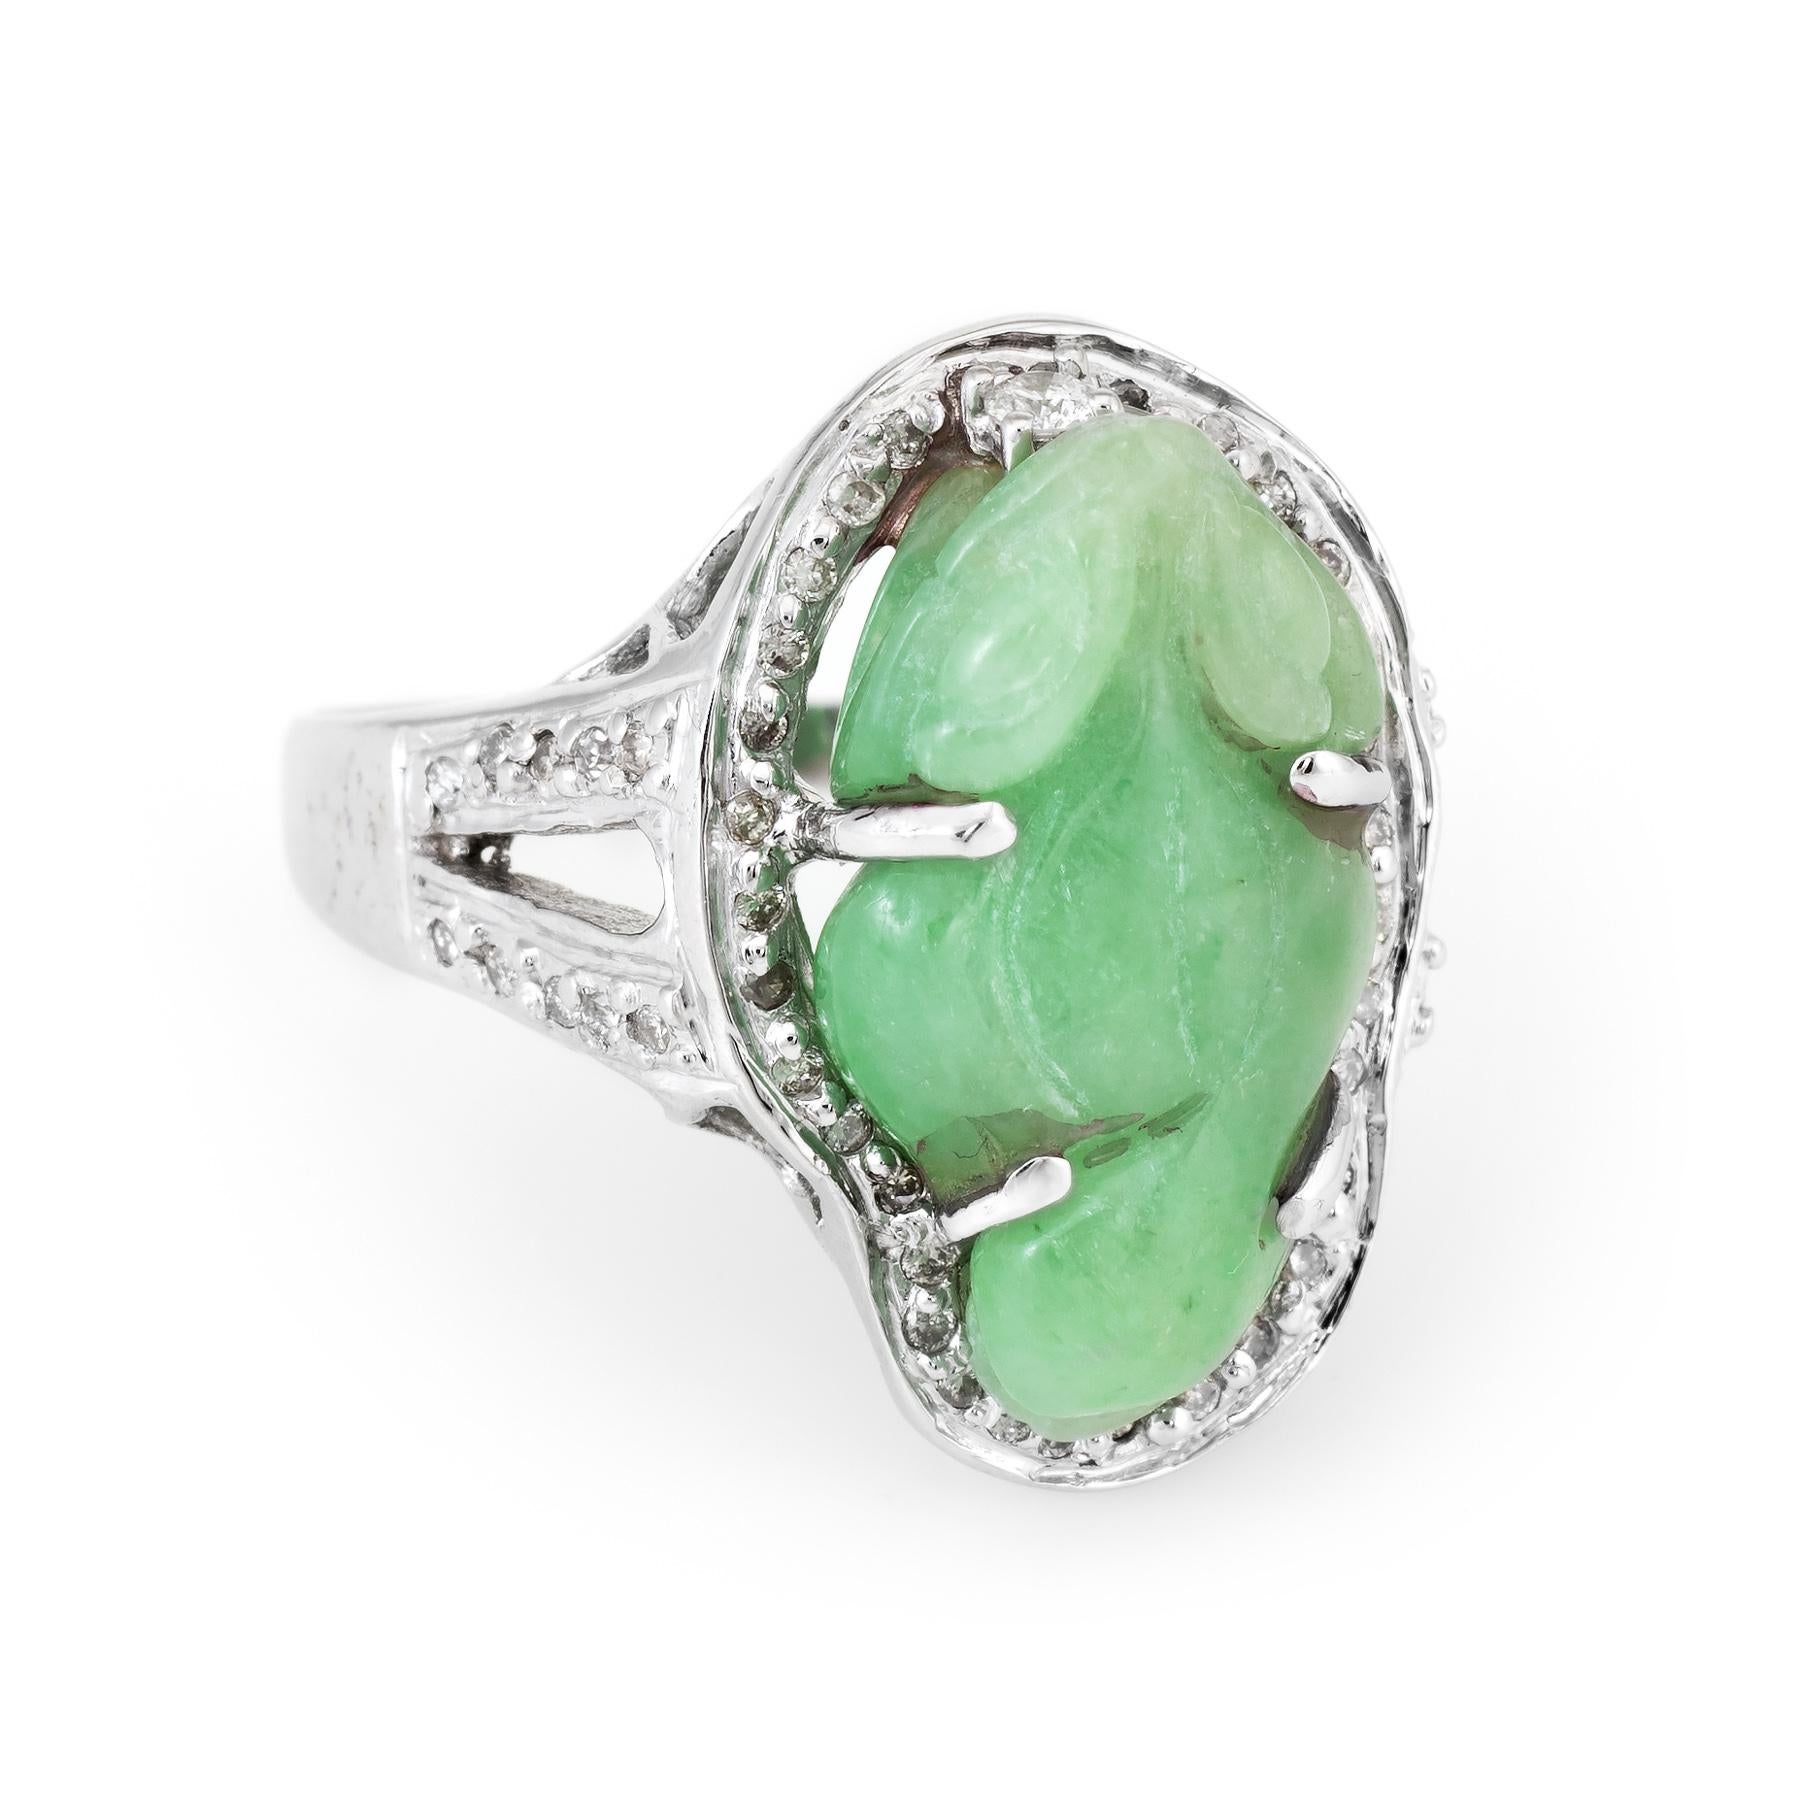 Finely detailed vintage cocktail ring, crafted in 18 karat white gold. 

Jade is carved in the form of a frog measuring 18mm x 11mm, accented with an estimated 0.29 carats of diamonds (estimated at H-I color and SI1-2 clarity). The jade is in